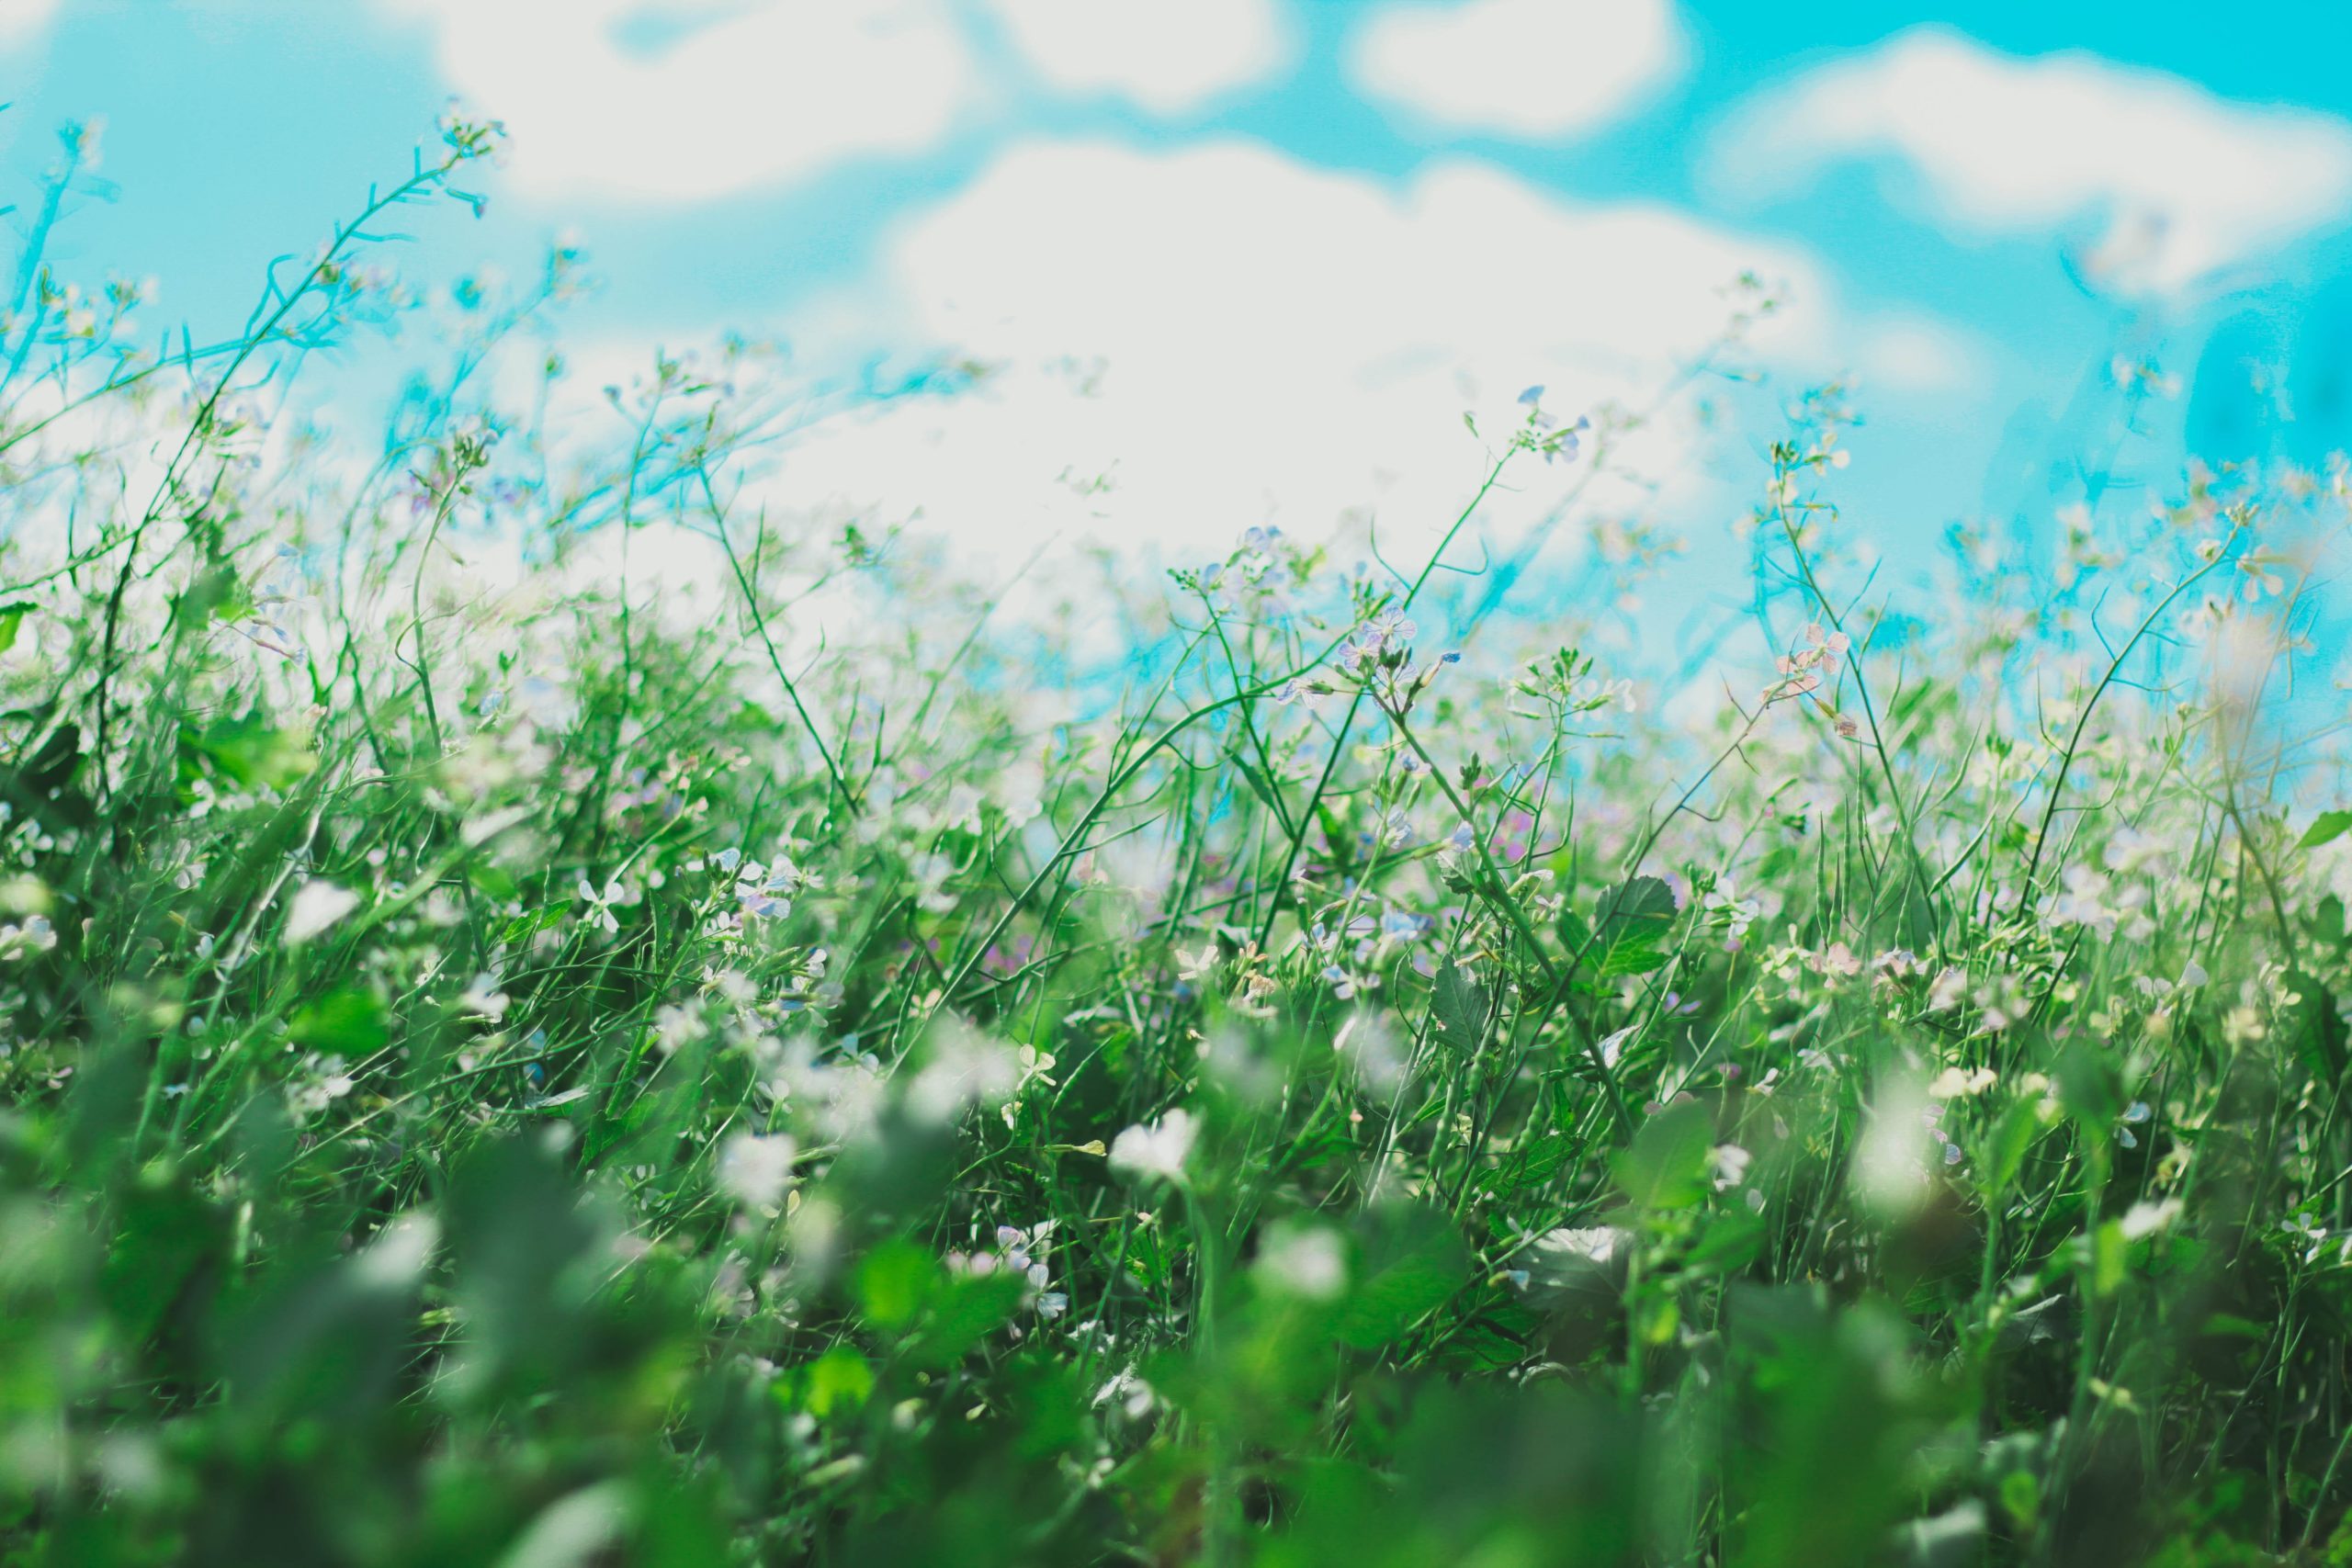 ground-level photo of grass and lawn flowers against blue sky